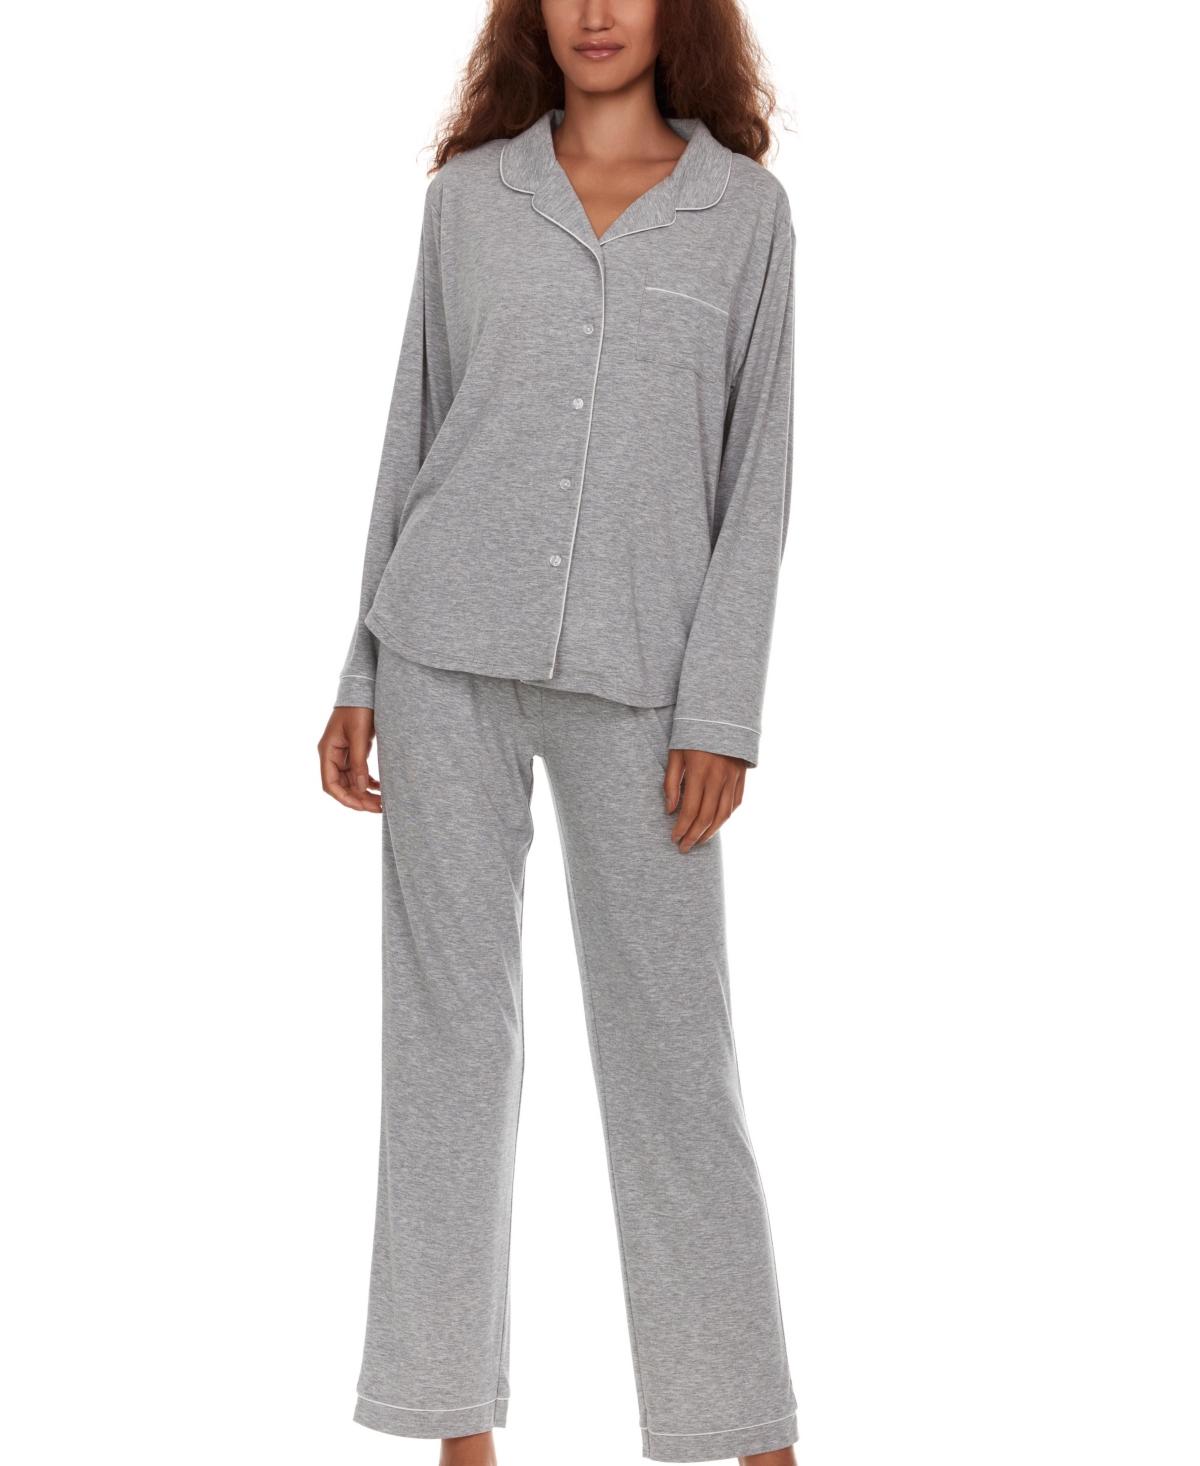 Women's Annie 2 Piece Notch Long Sleeve Top and Knit Pants Pajama Set - Heather Gray